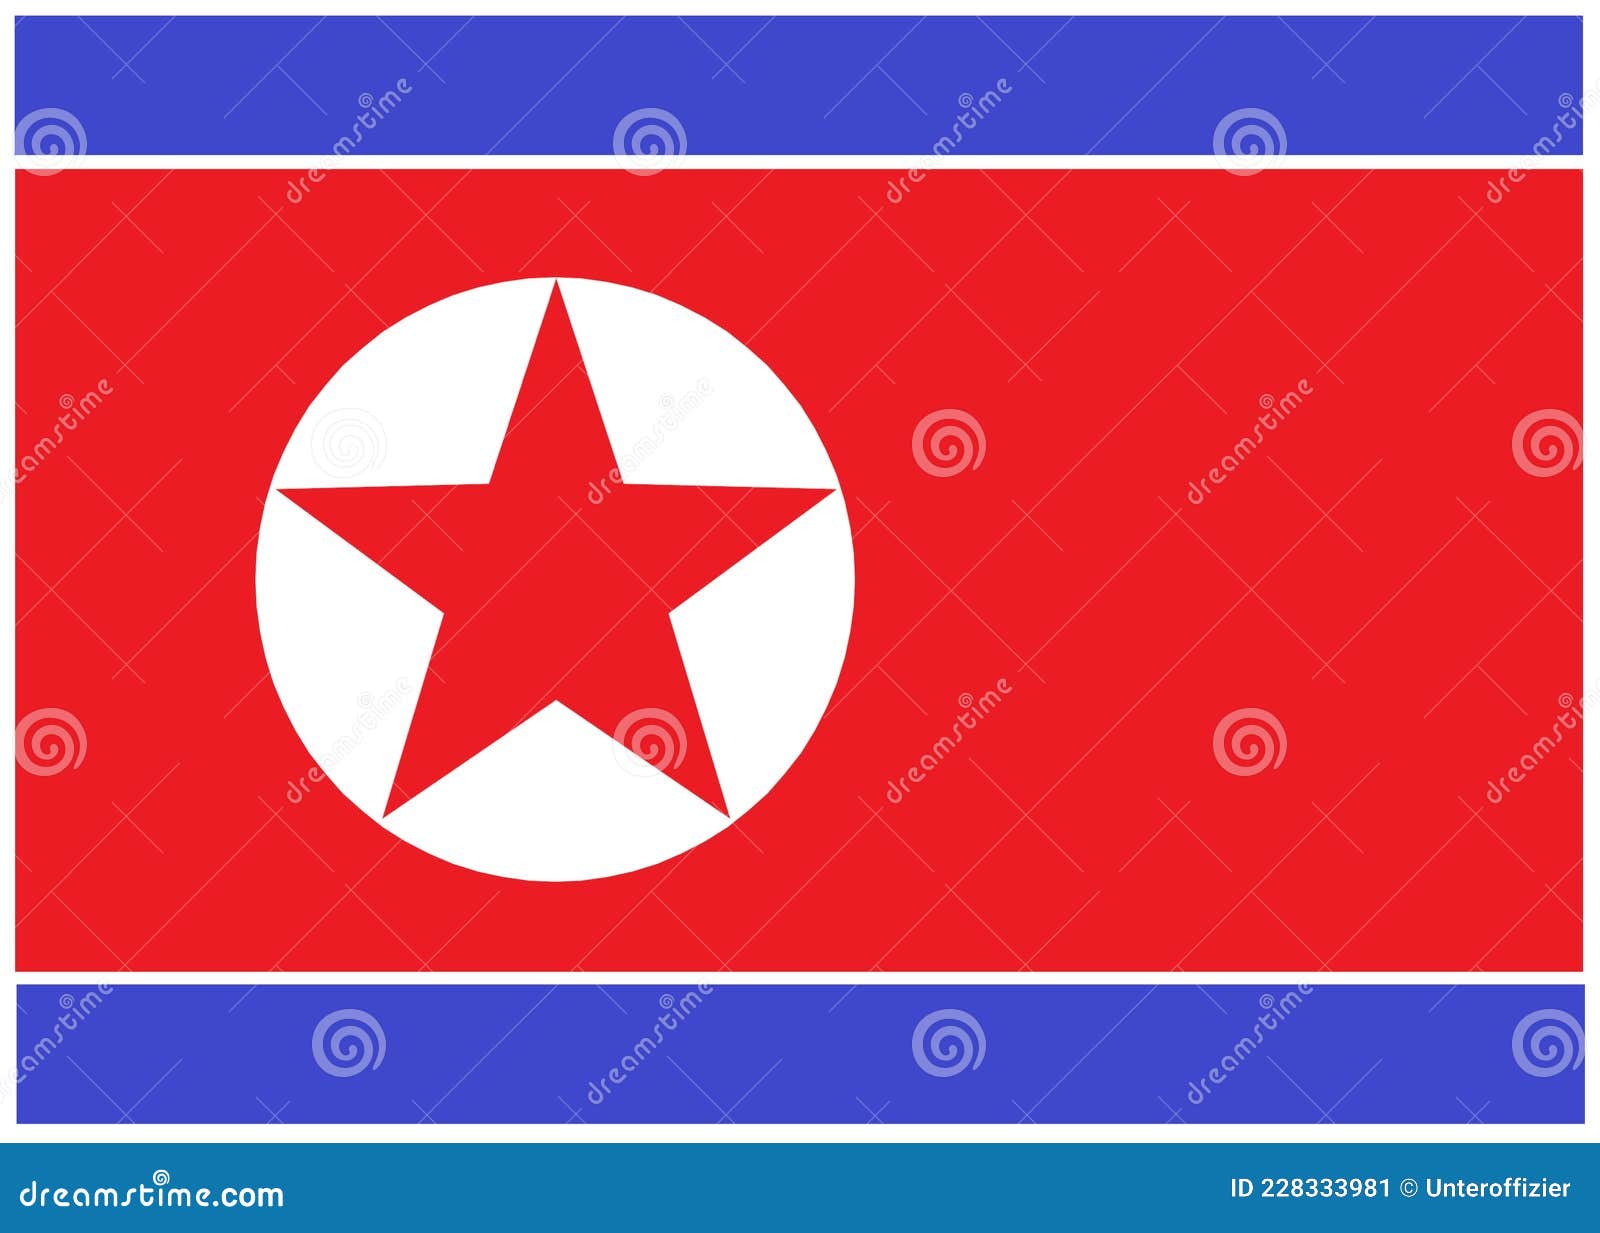 The Flag of North Korea with Red and Blue Horizontal Bands and a Red Star within White Stock Illustration - Illustration of background, central: 228333981